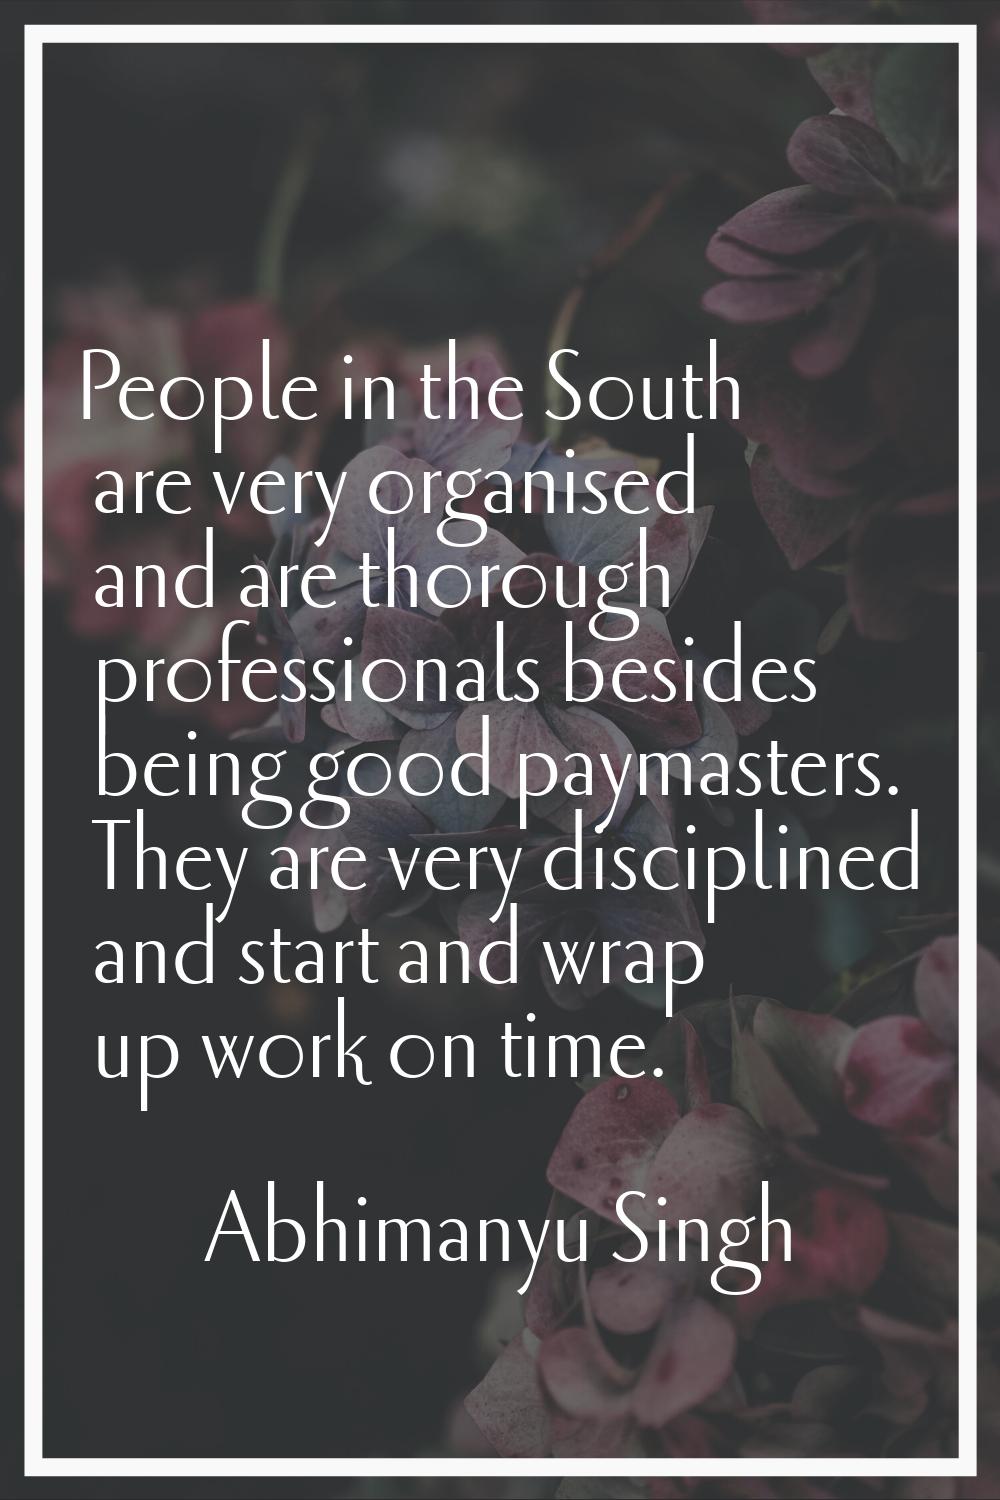 People in the South are very organised and are thorough professionals besides being good paymasters